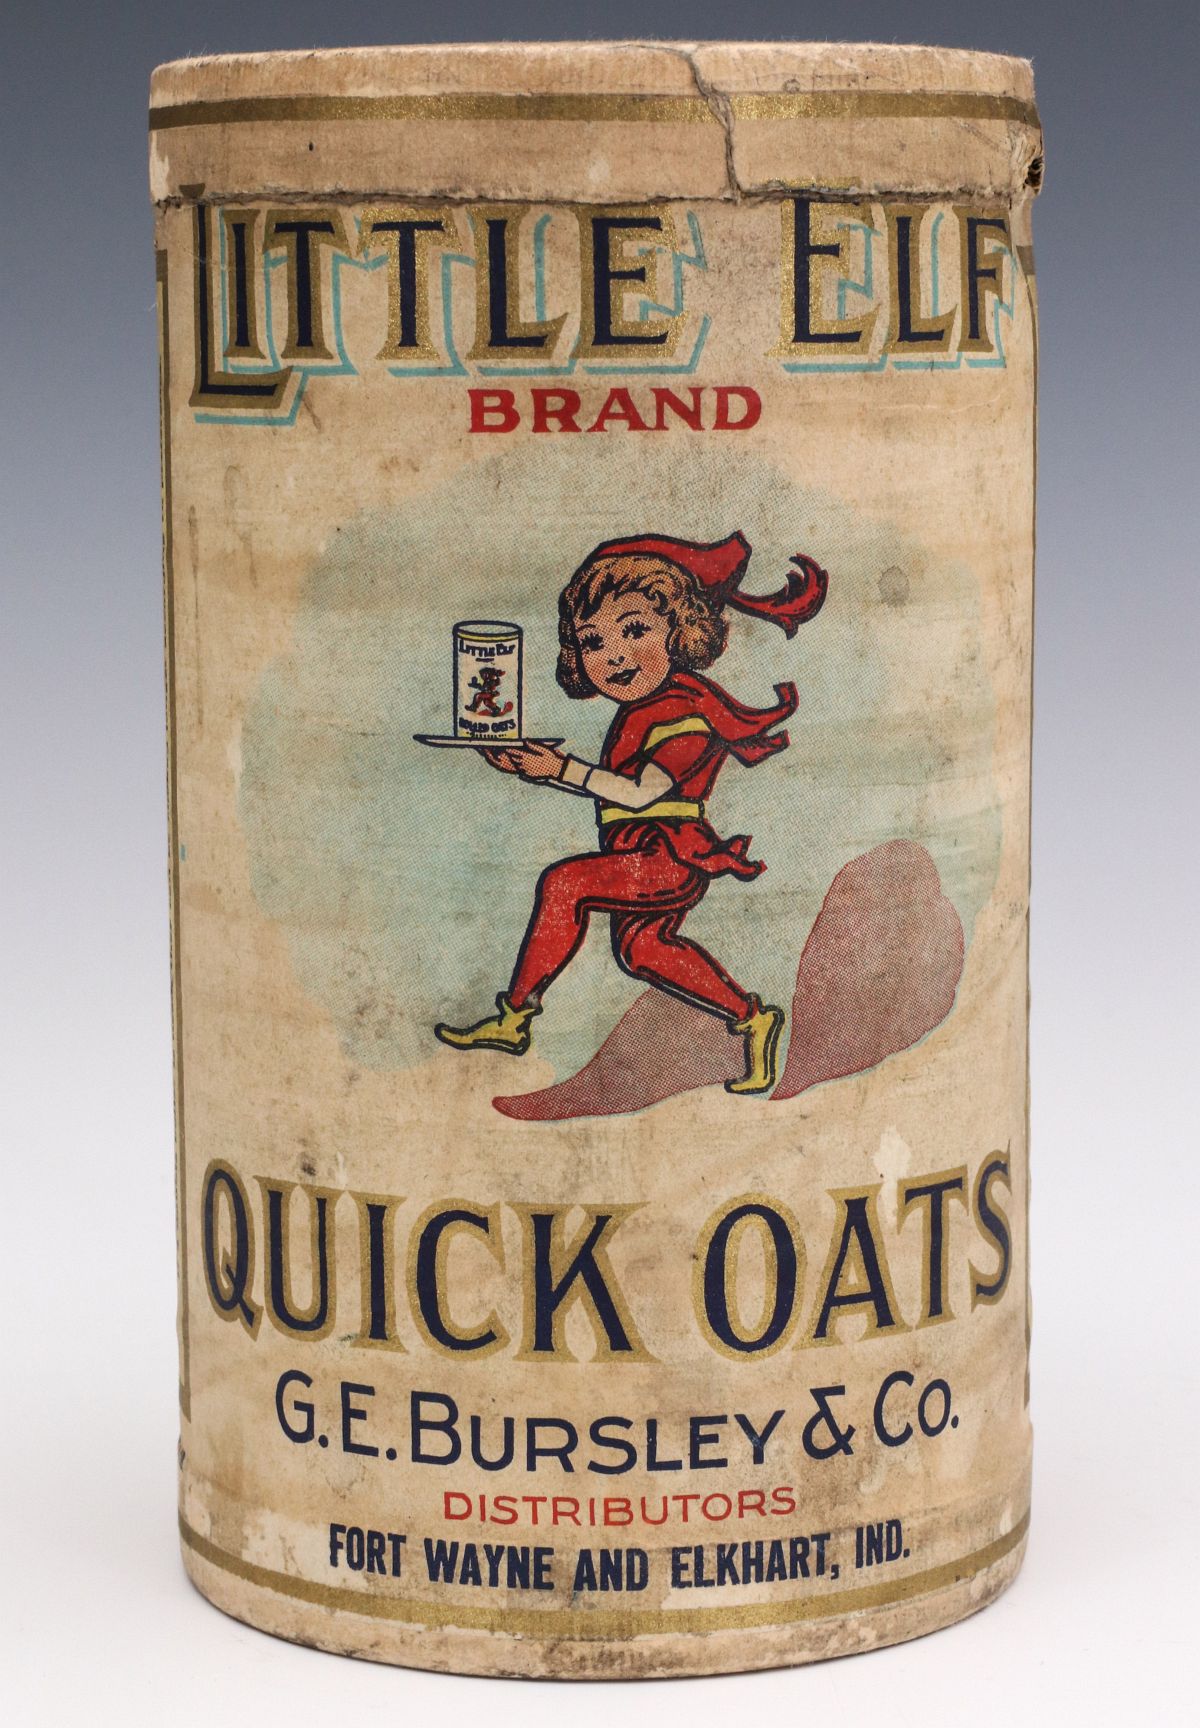 A LITTLE ELF BRAND QUICK OATS CONTAINER